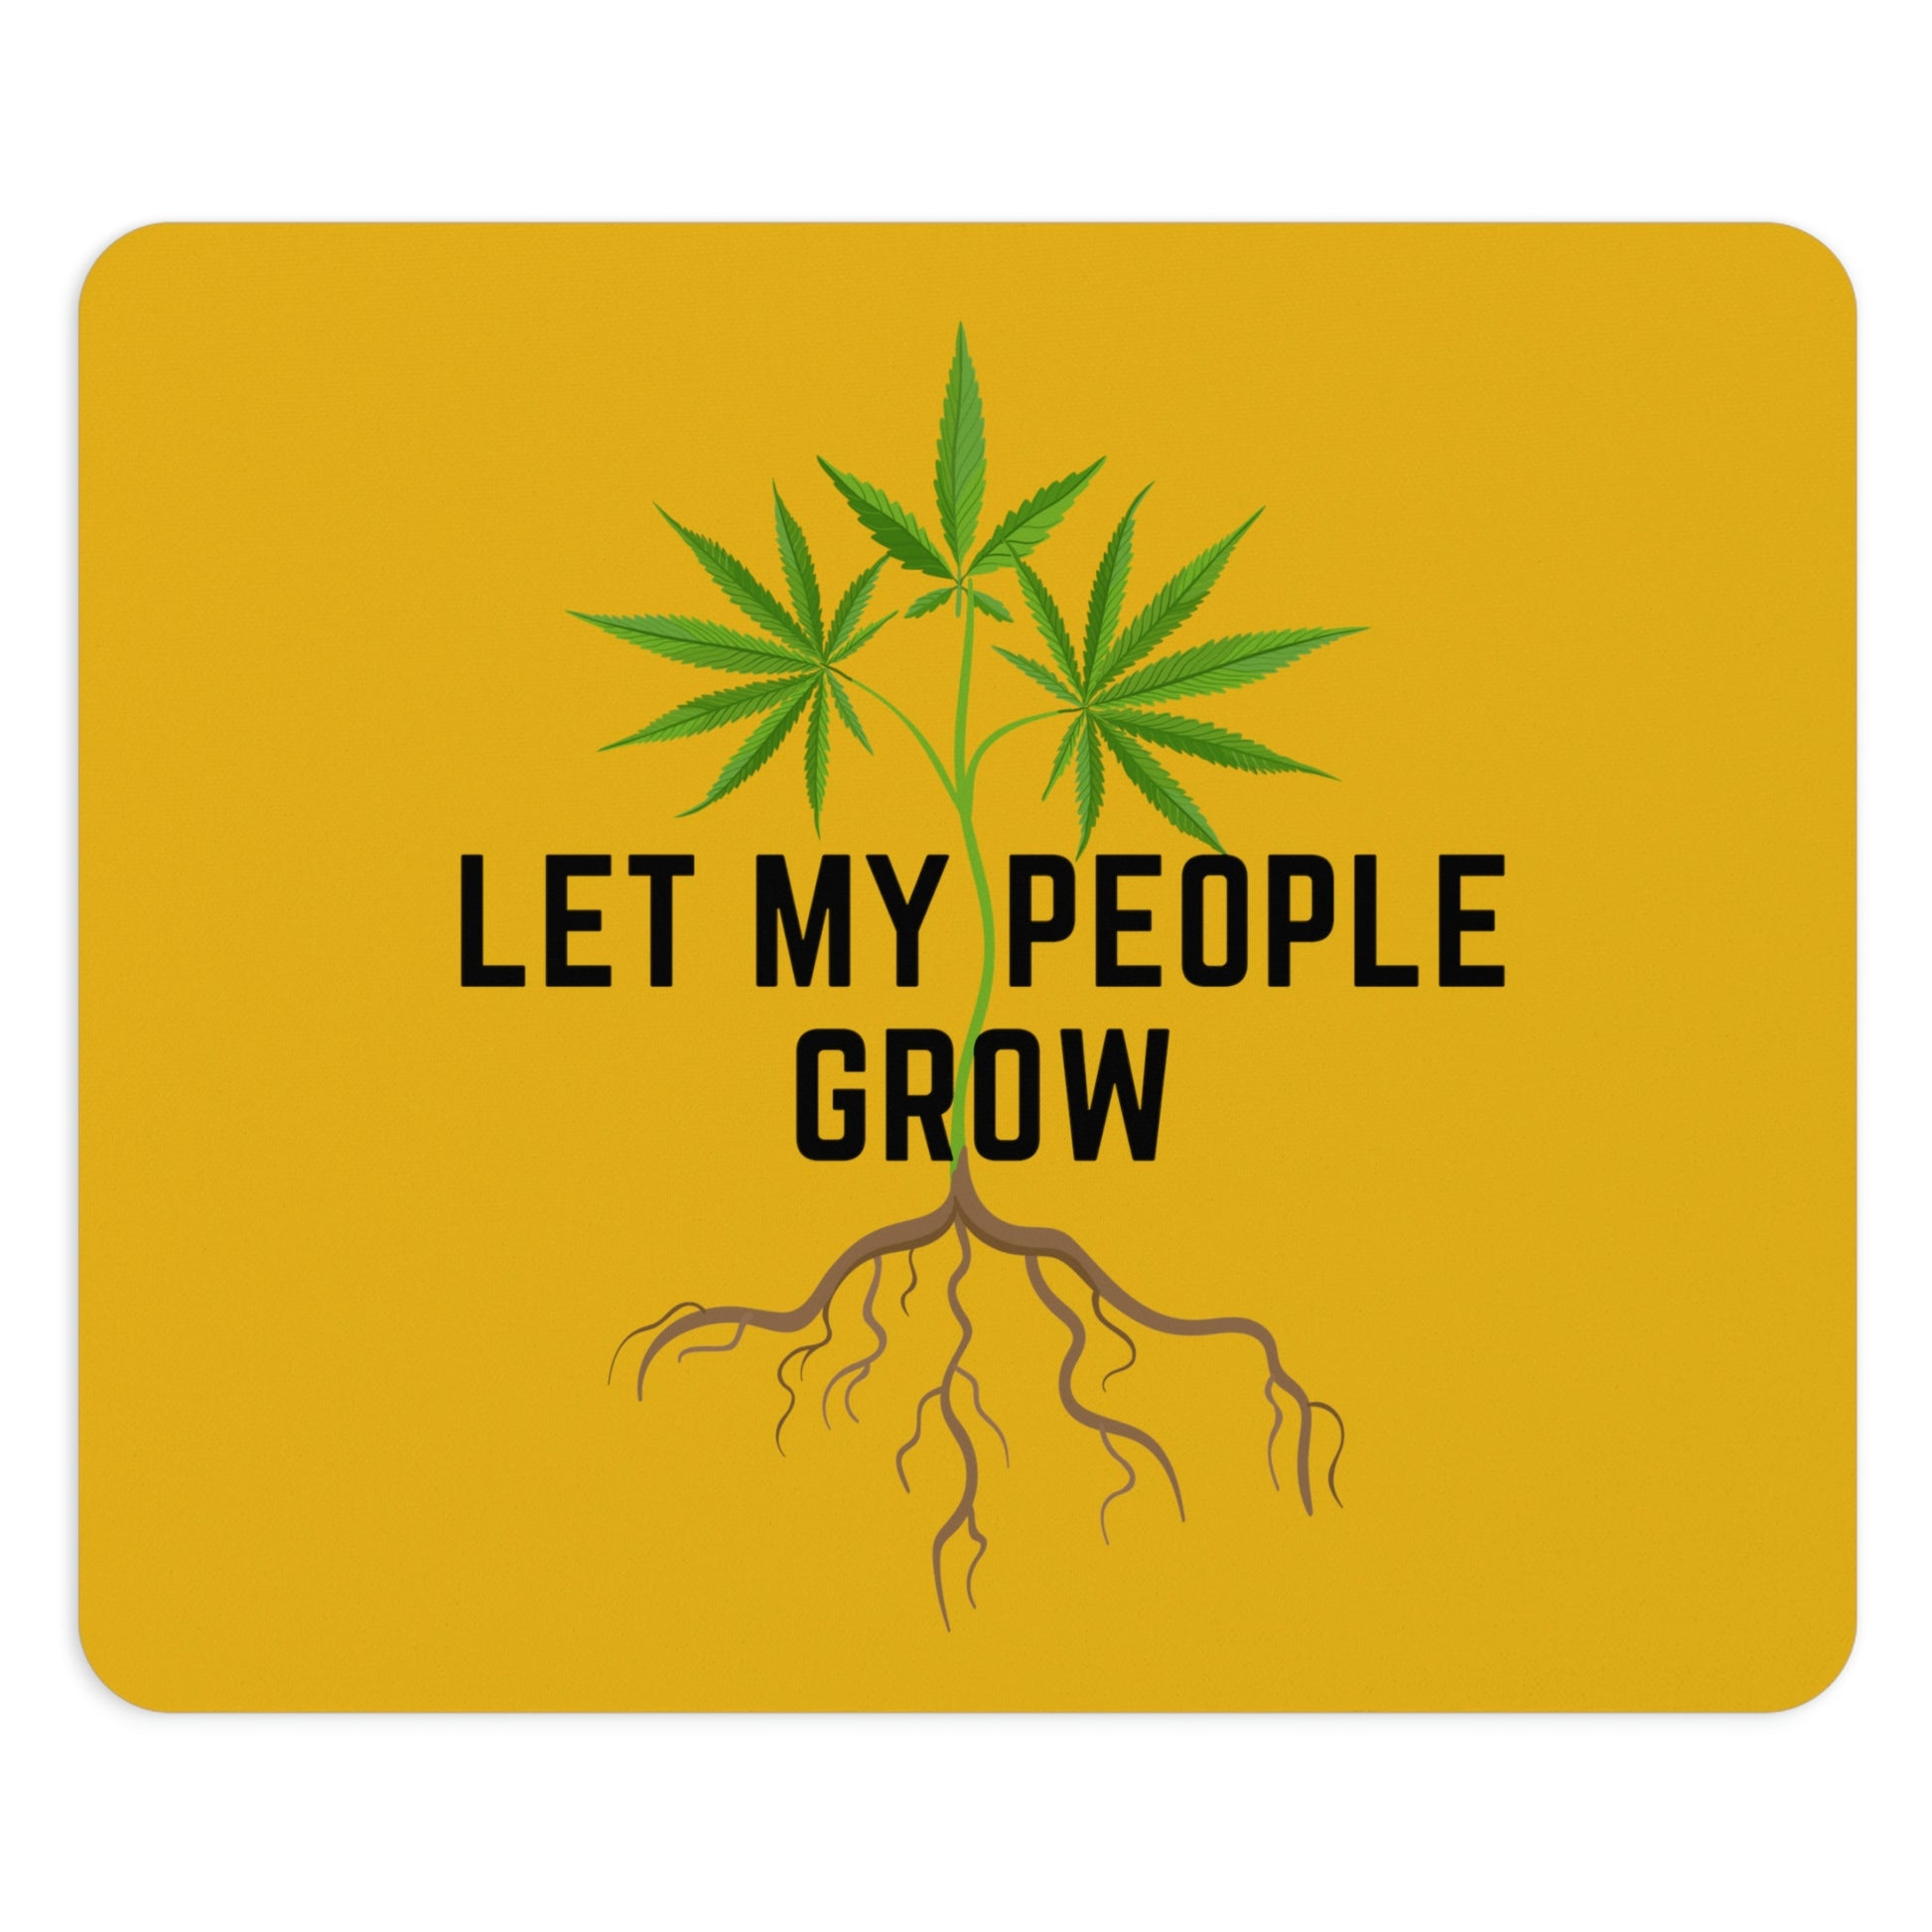 Let Let My People Grow Weed Mouse Pad mouse mat.